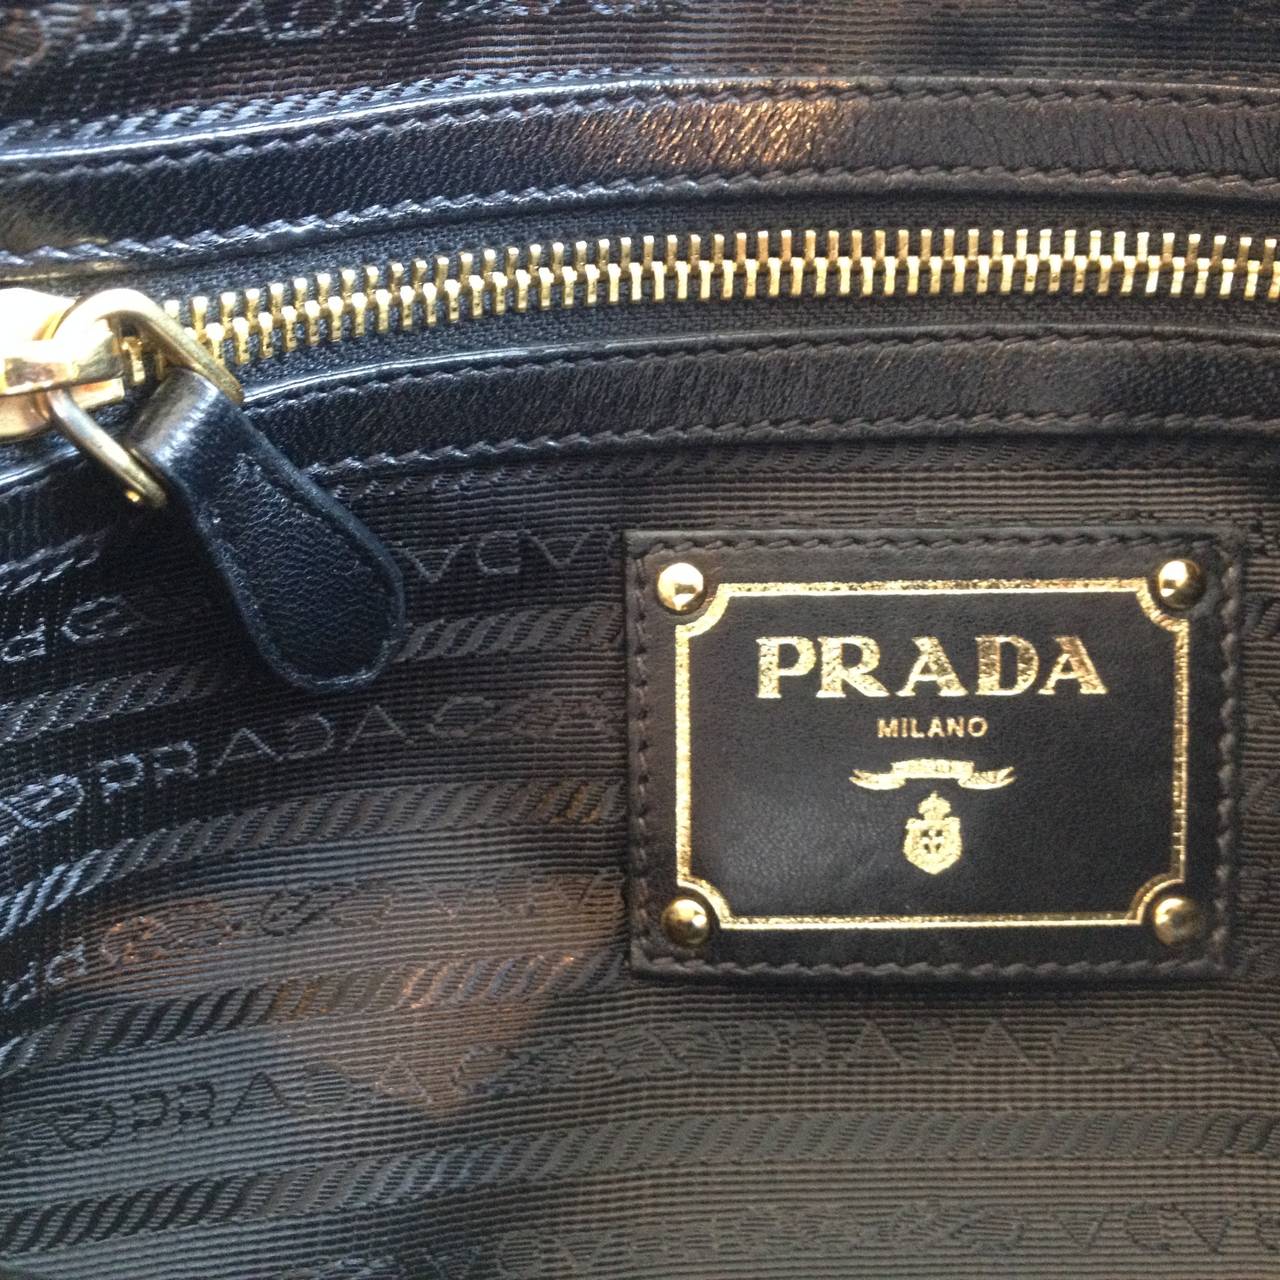 Men's Prada Black Crinkly Leather Clutch with Bow